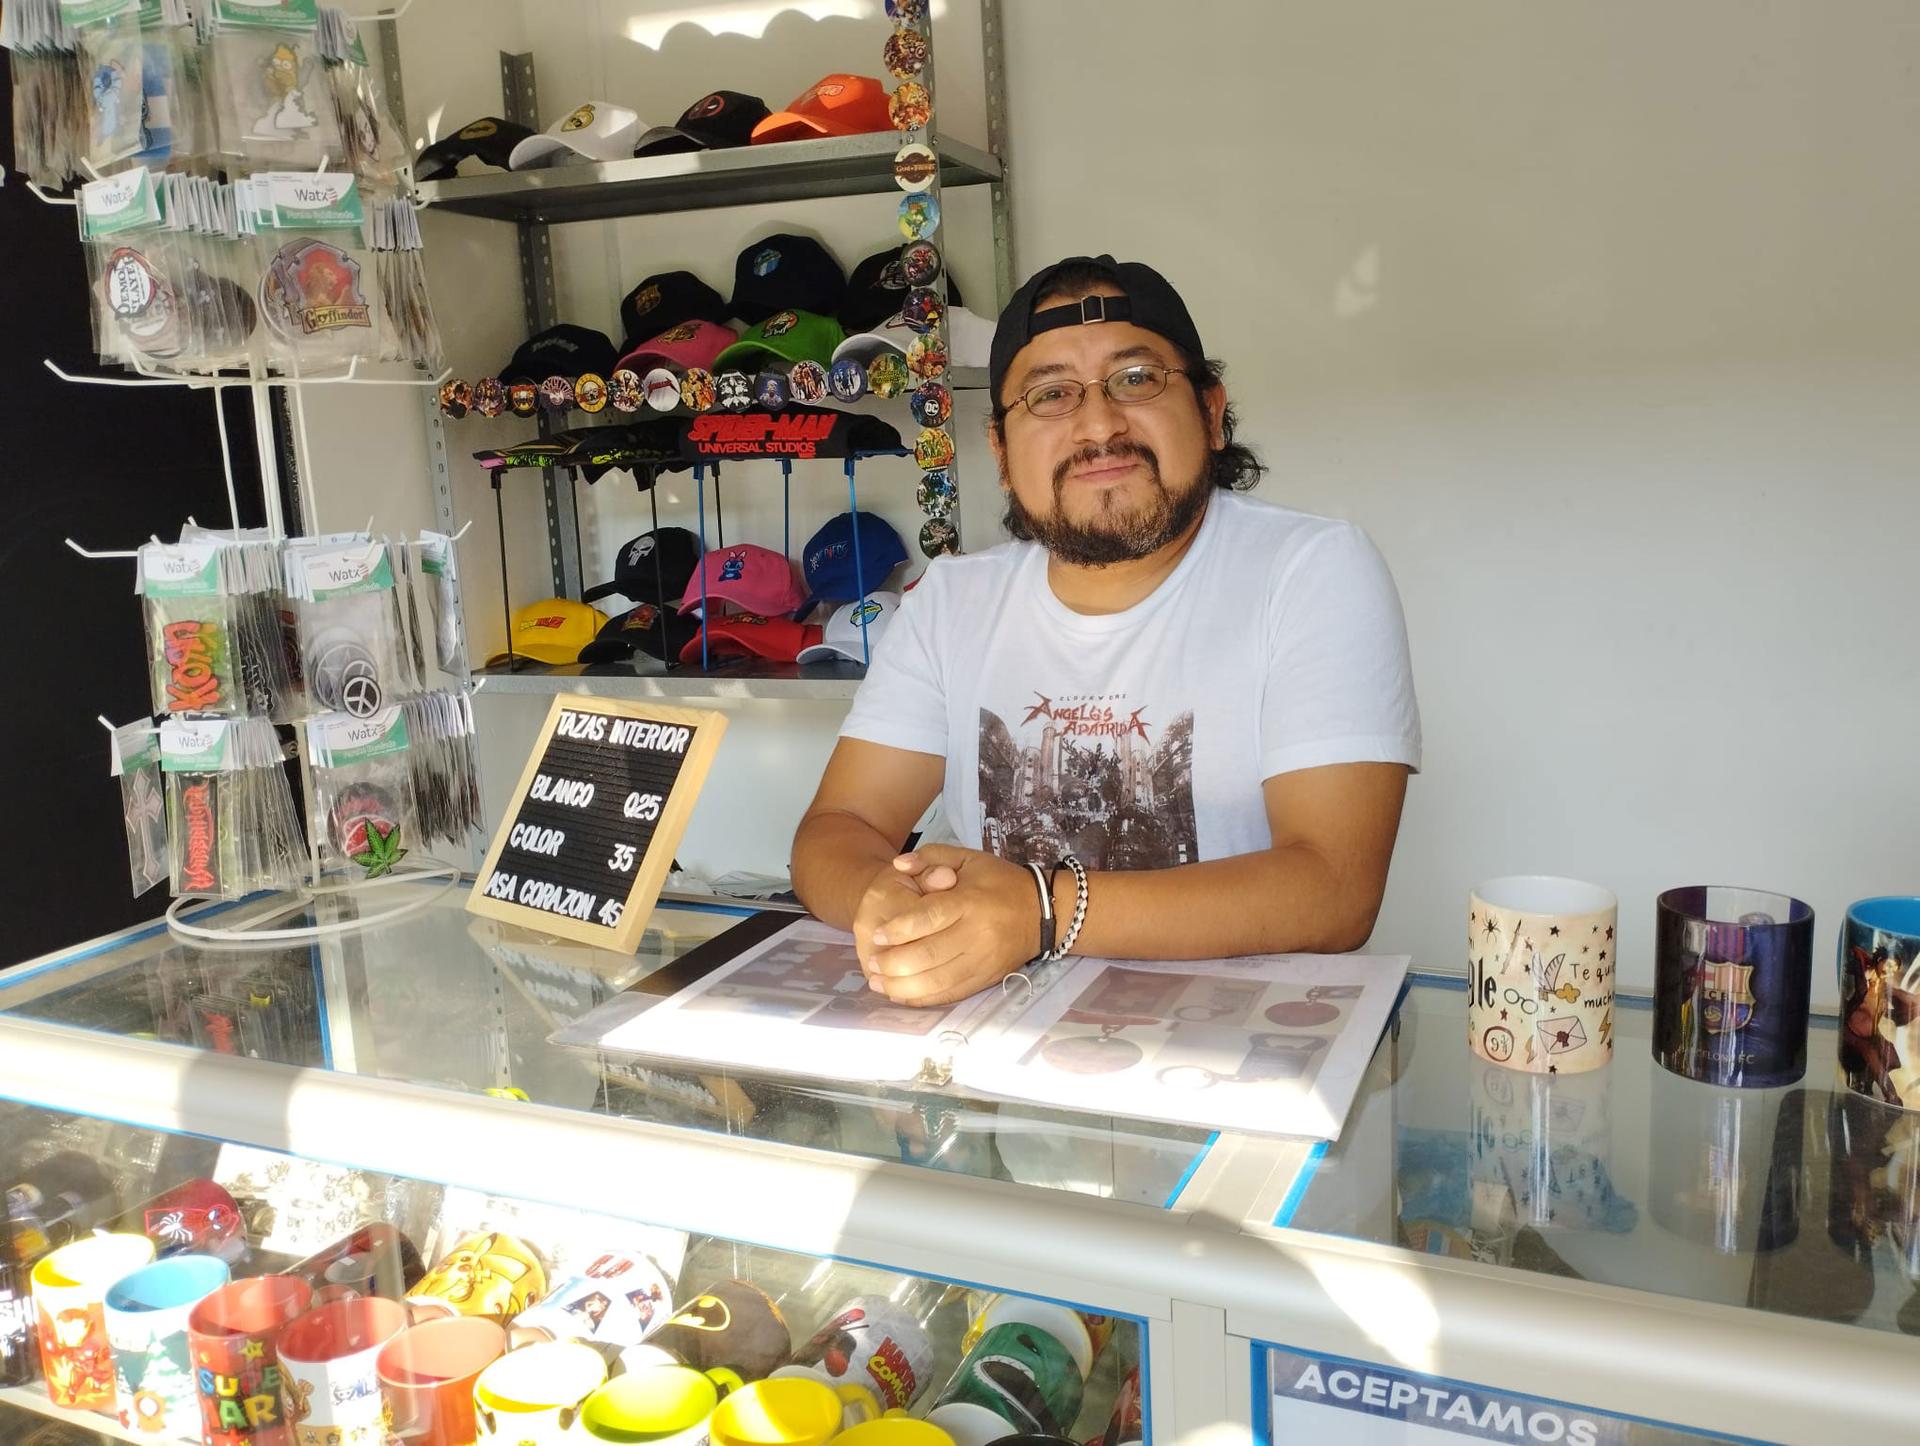 Carlos Rafael, who works at a gift shop, says he feels hopeful since Arévalo took office.